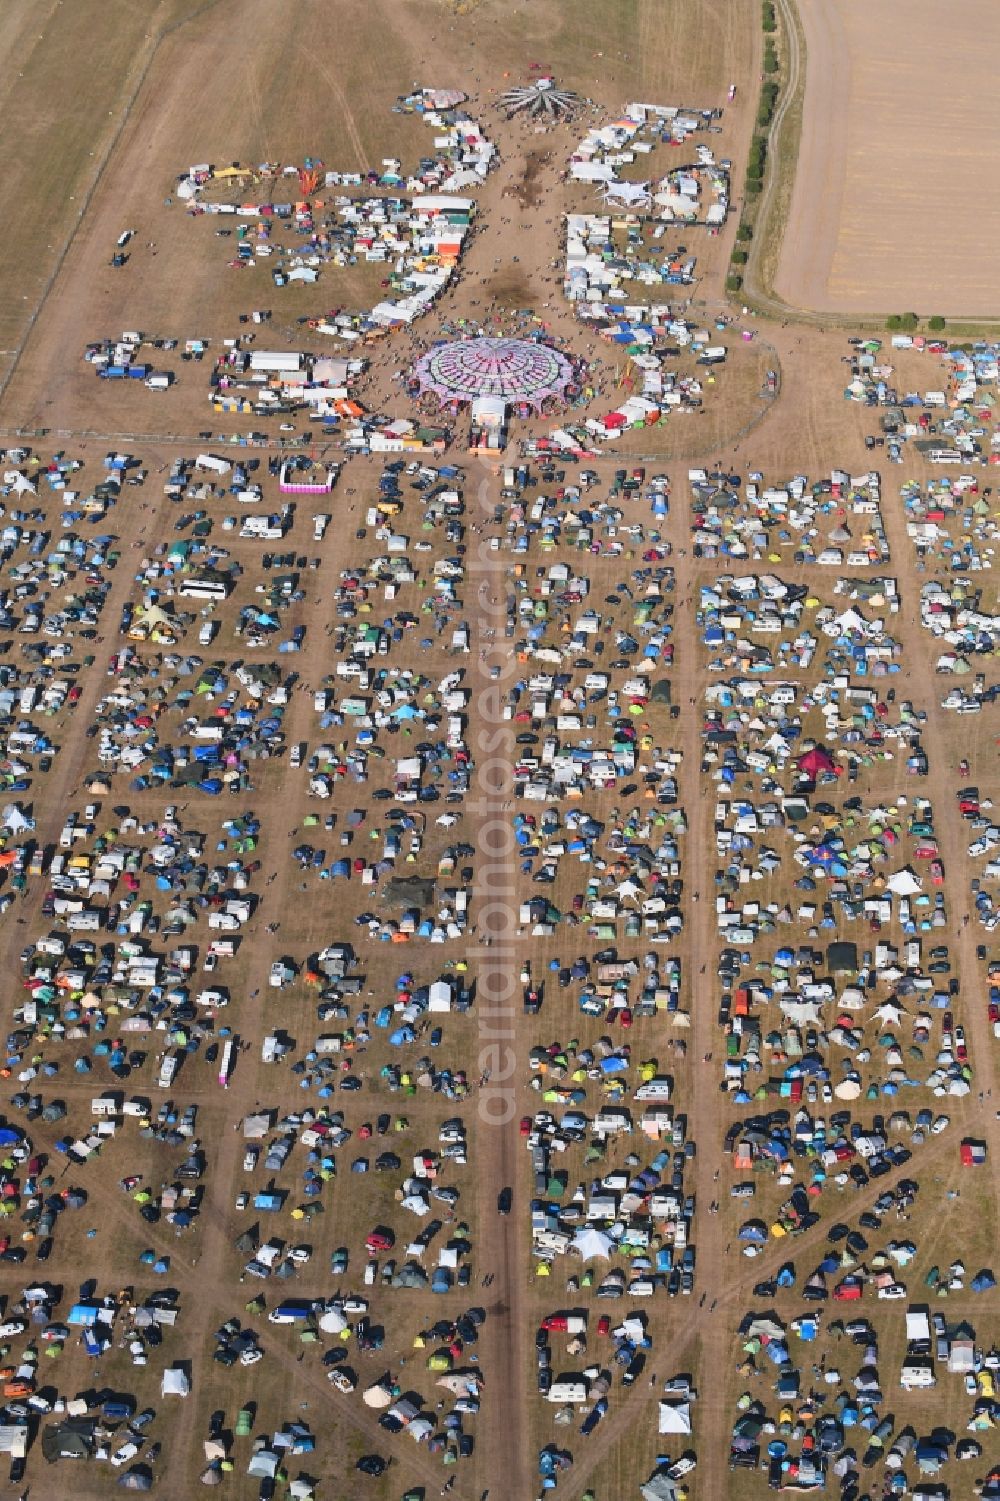 Stölln from the bird's eye view: Participants in the Antaris Projekt music festival on the event concert area on airfield in Stoelln in the state Brandenburg, Germany